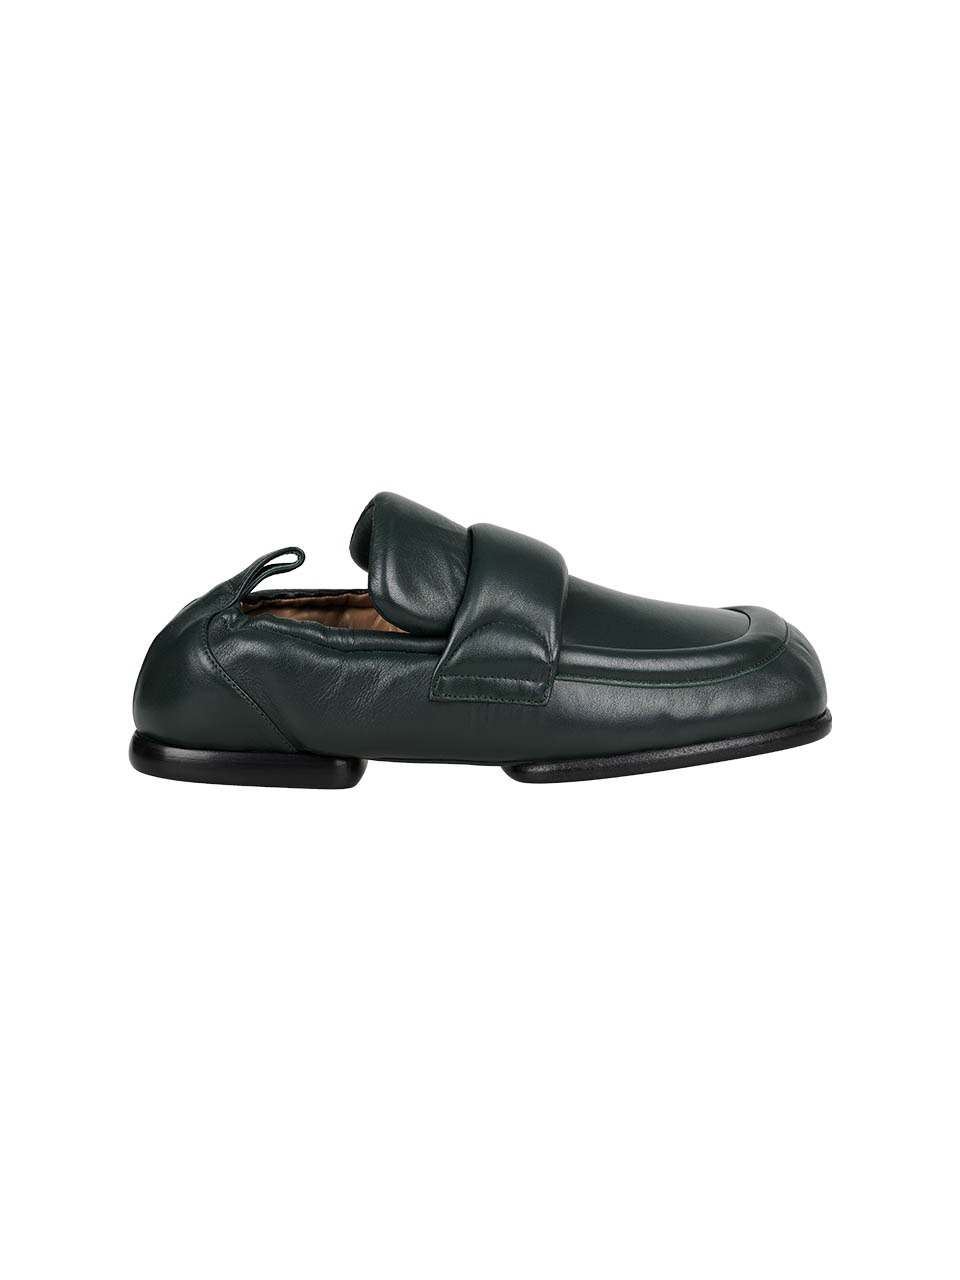 DRIES VAN NOTEN - PADDED LEATHER LOAFER (DEEP GREEN)